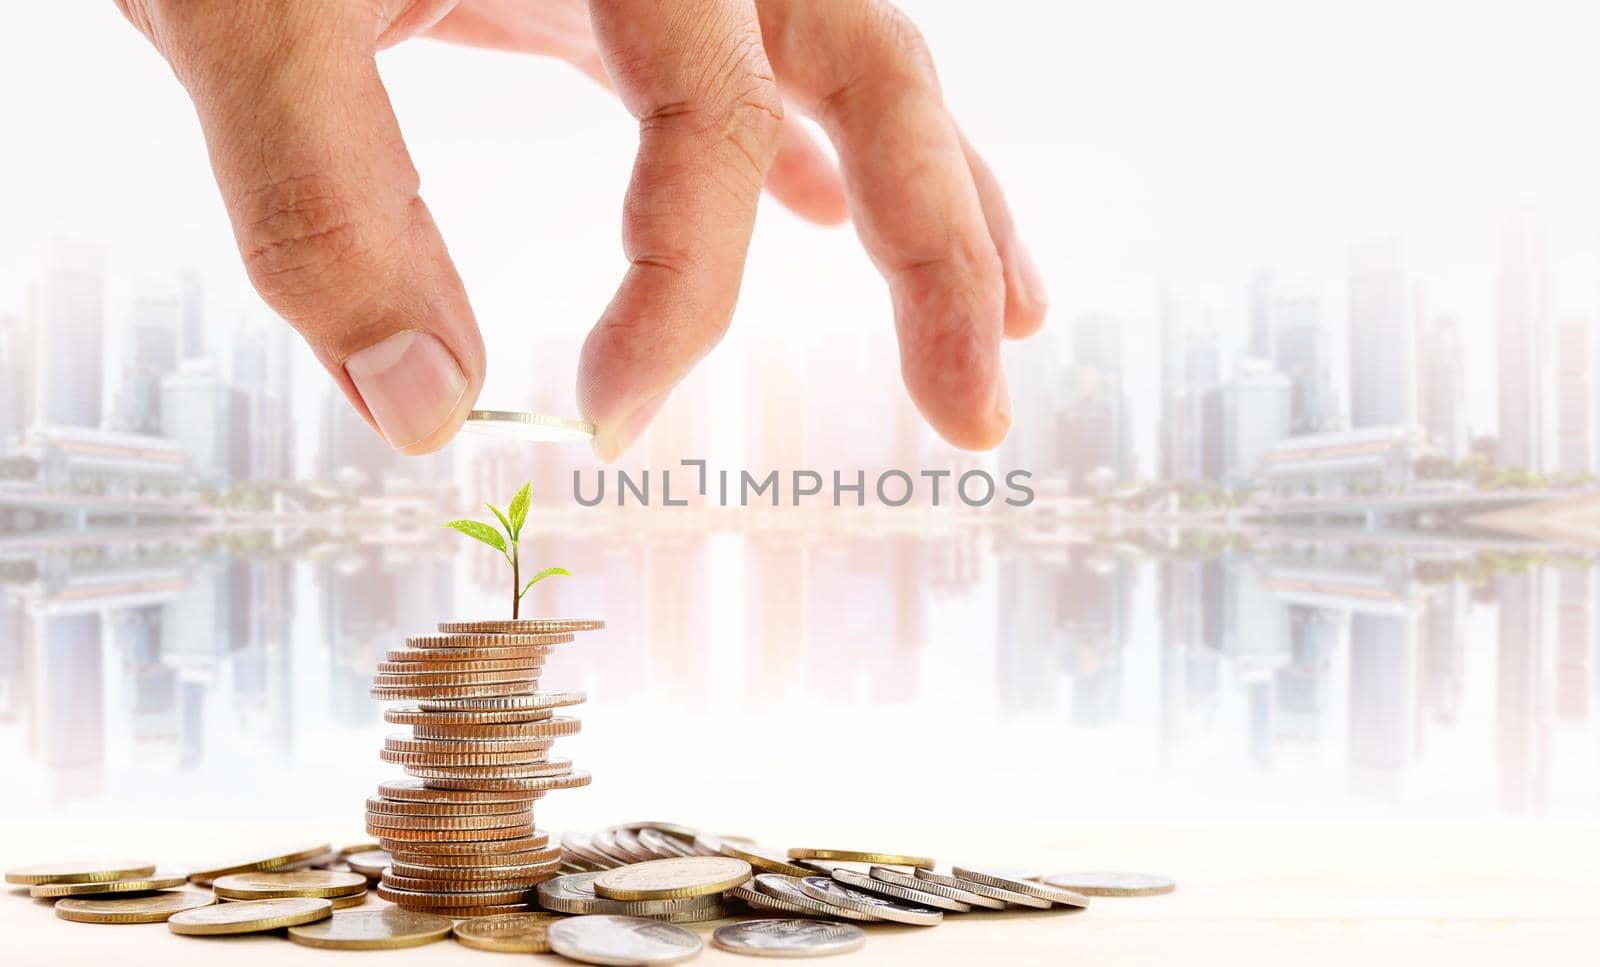 Human hand placing a coin on a pile of coins with a small tree on top with blurred skyscraper background, use for business and financial growth concepts.